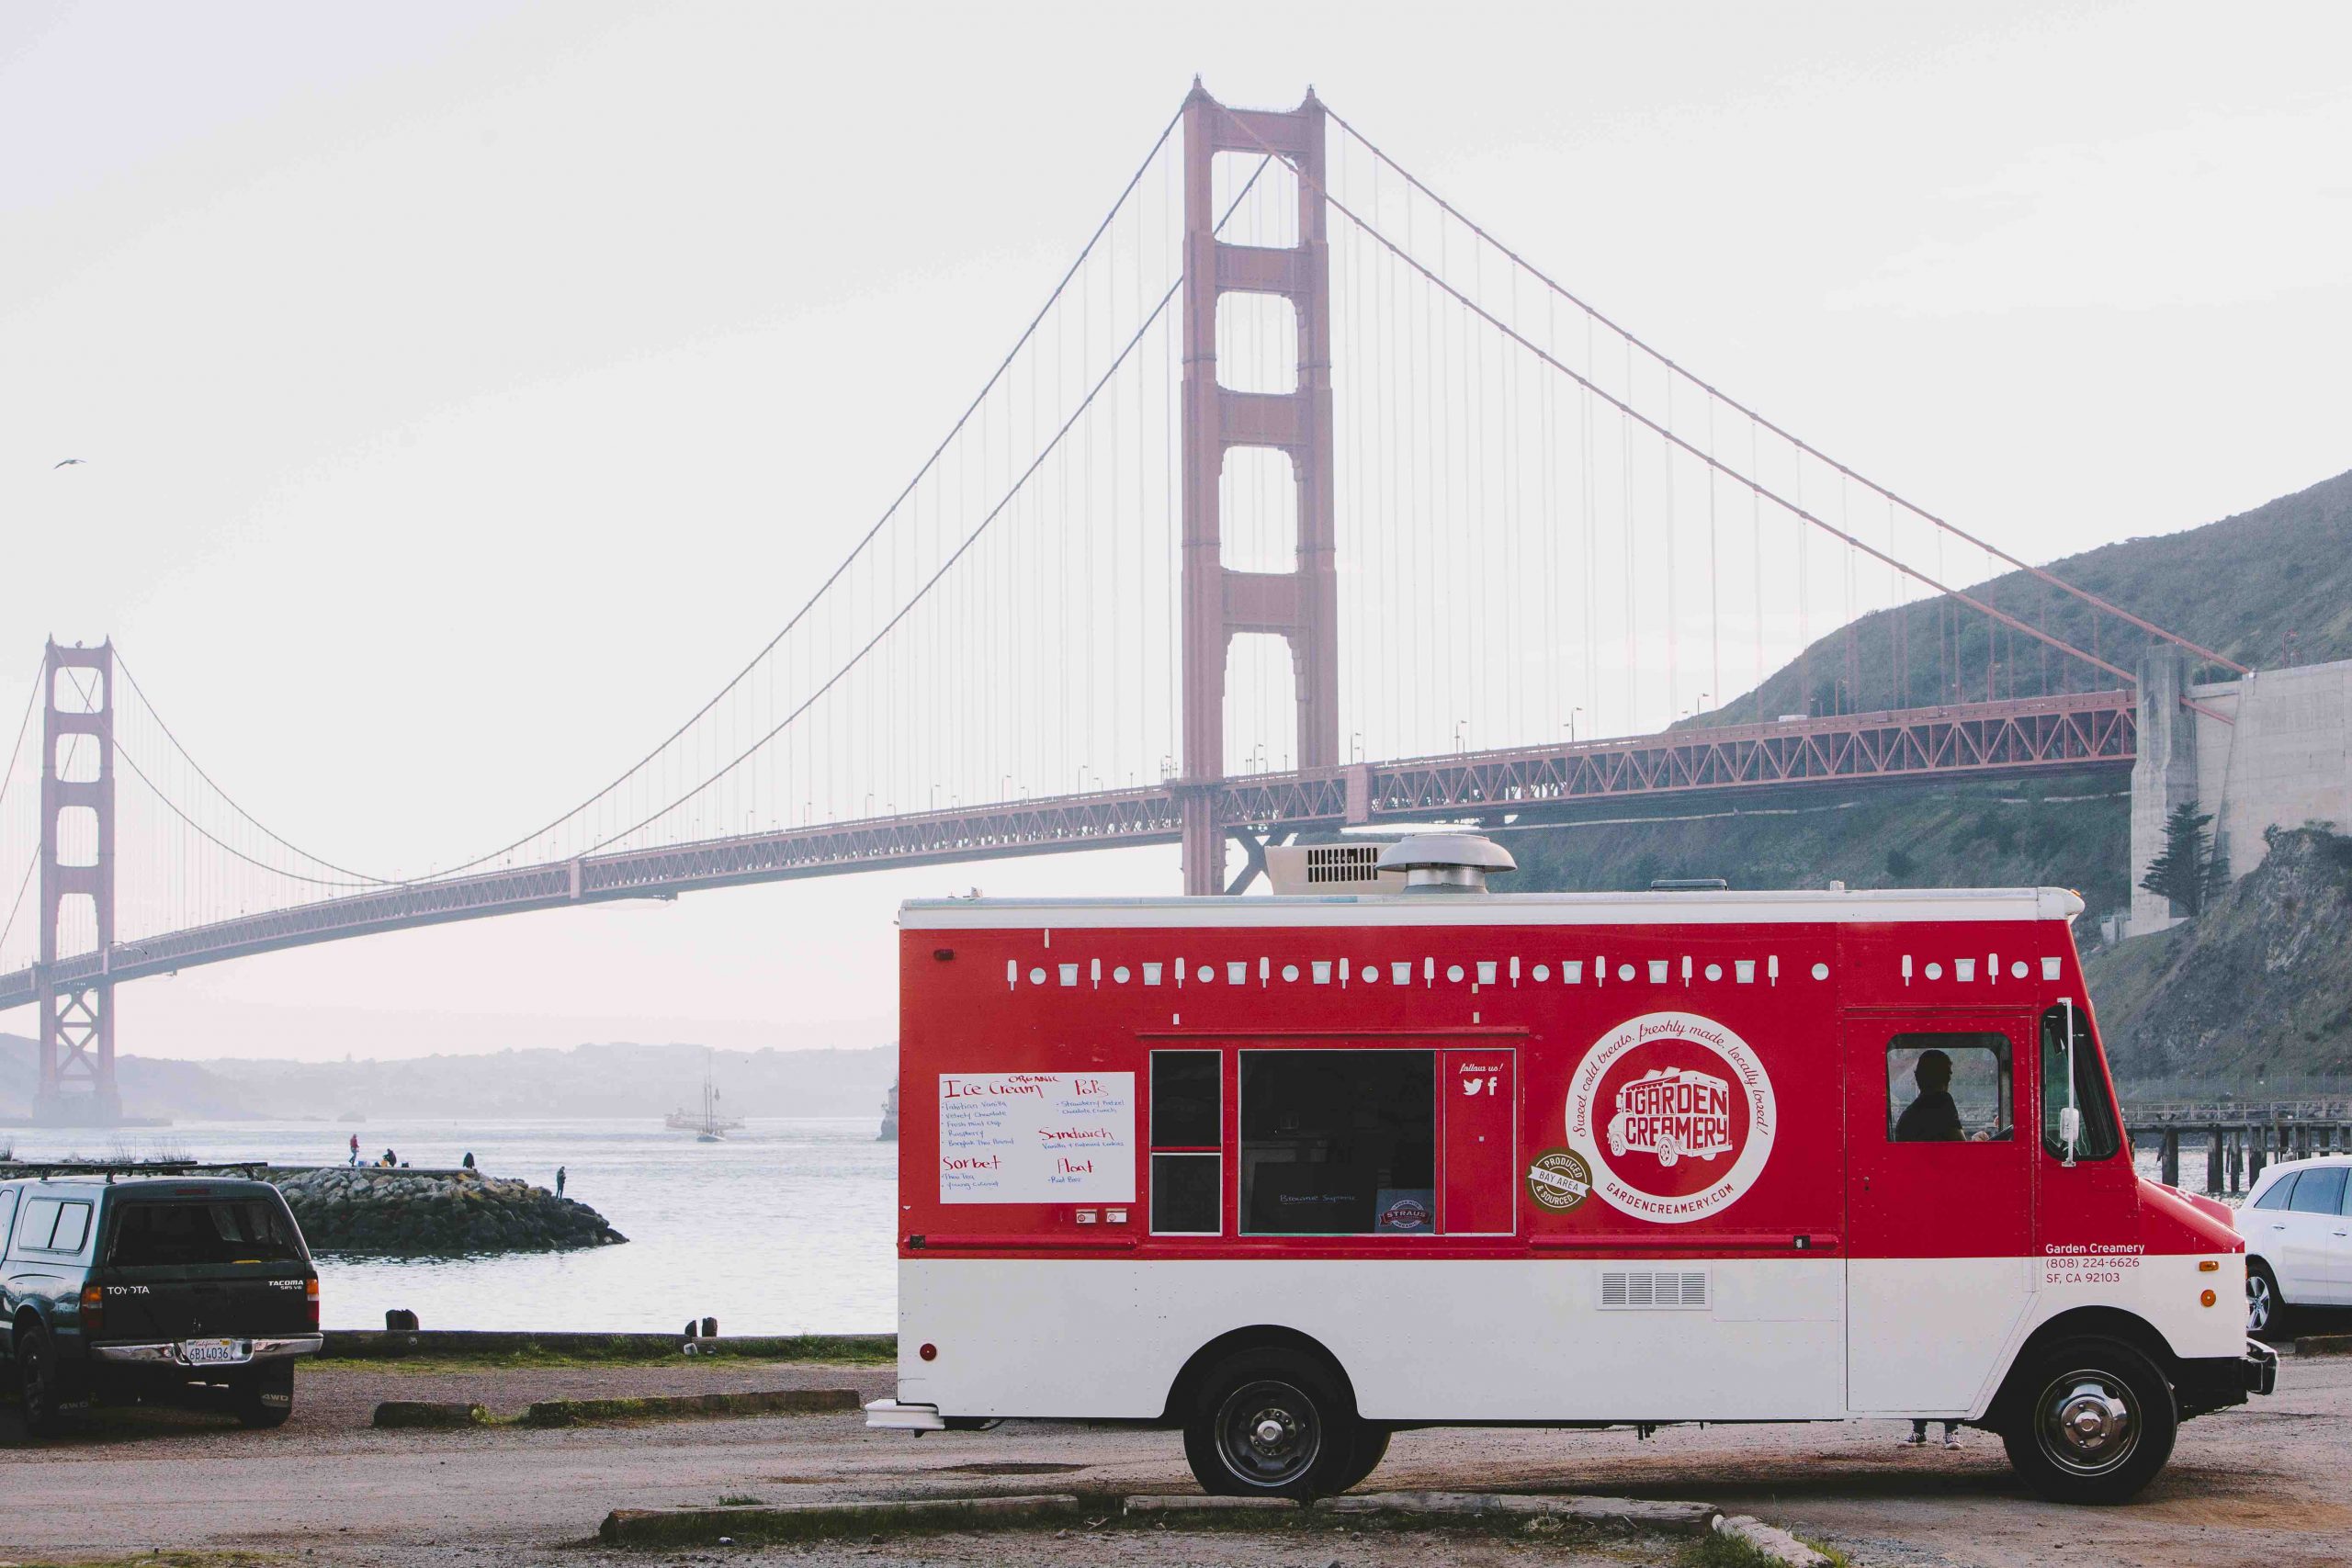 Red and white food truck in front of a red bridge